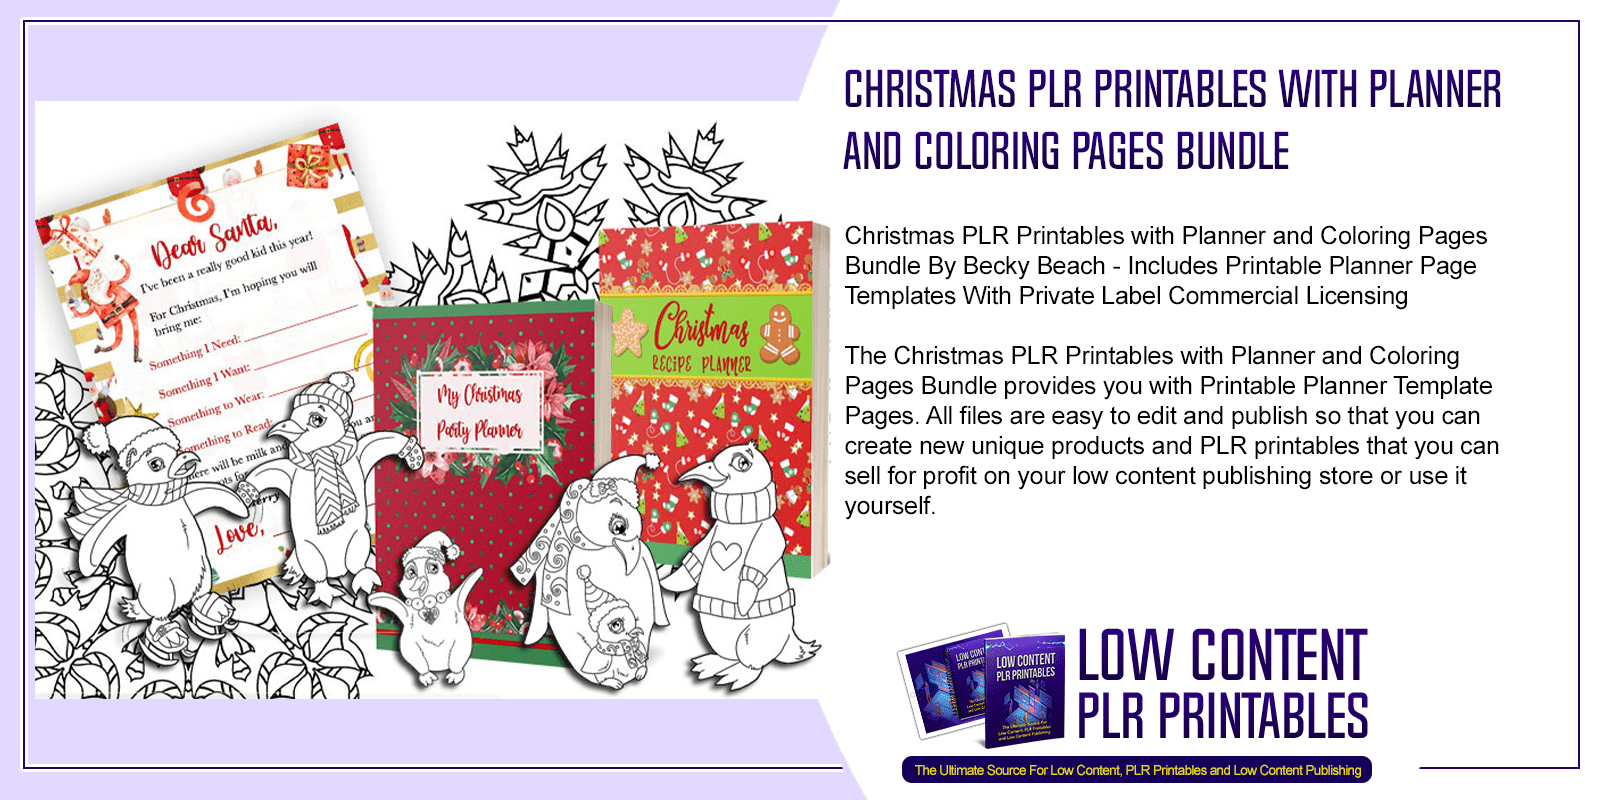 Christmas PLR Printables with Planner and Coloring Pages Bundle